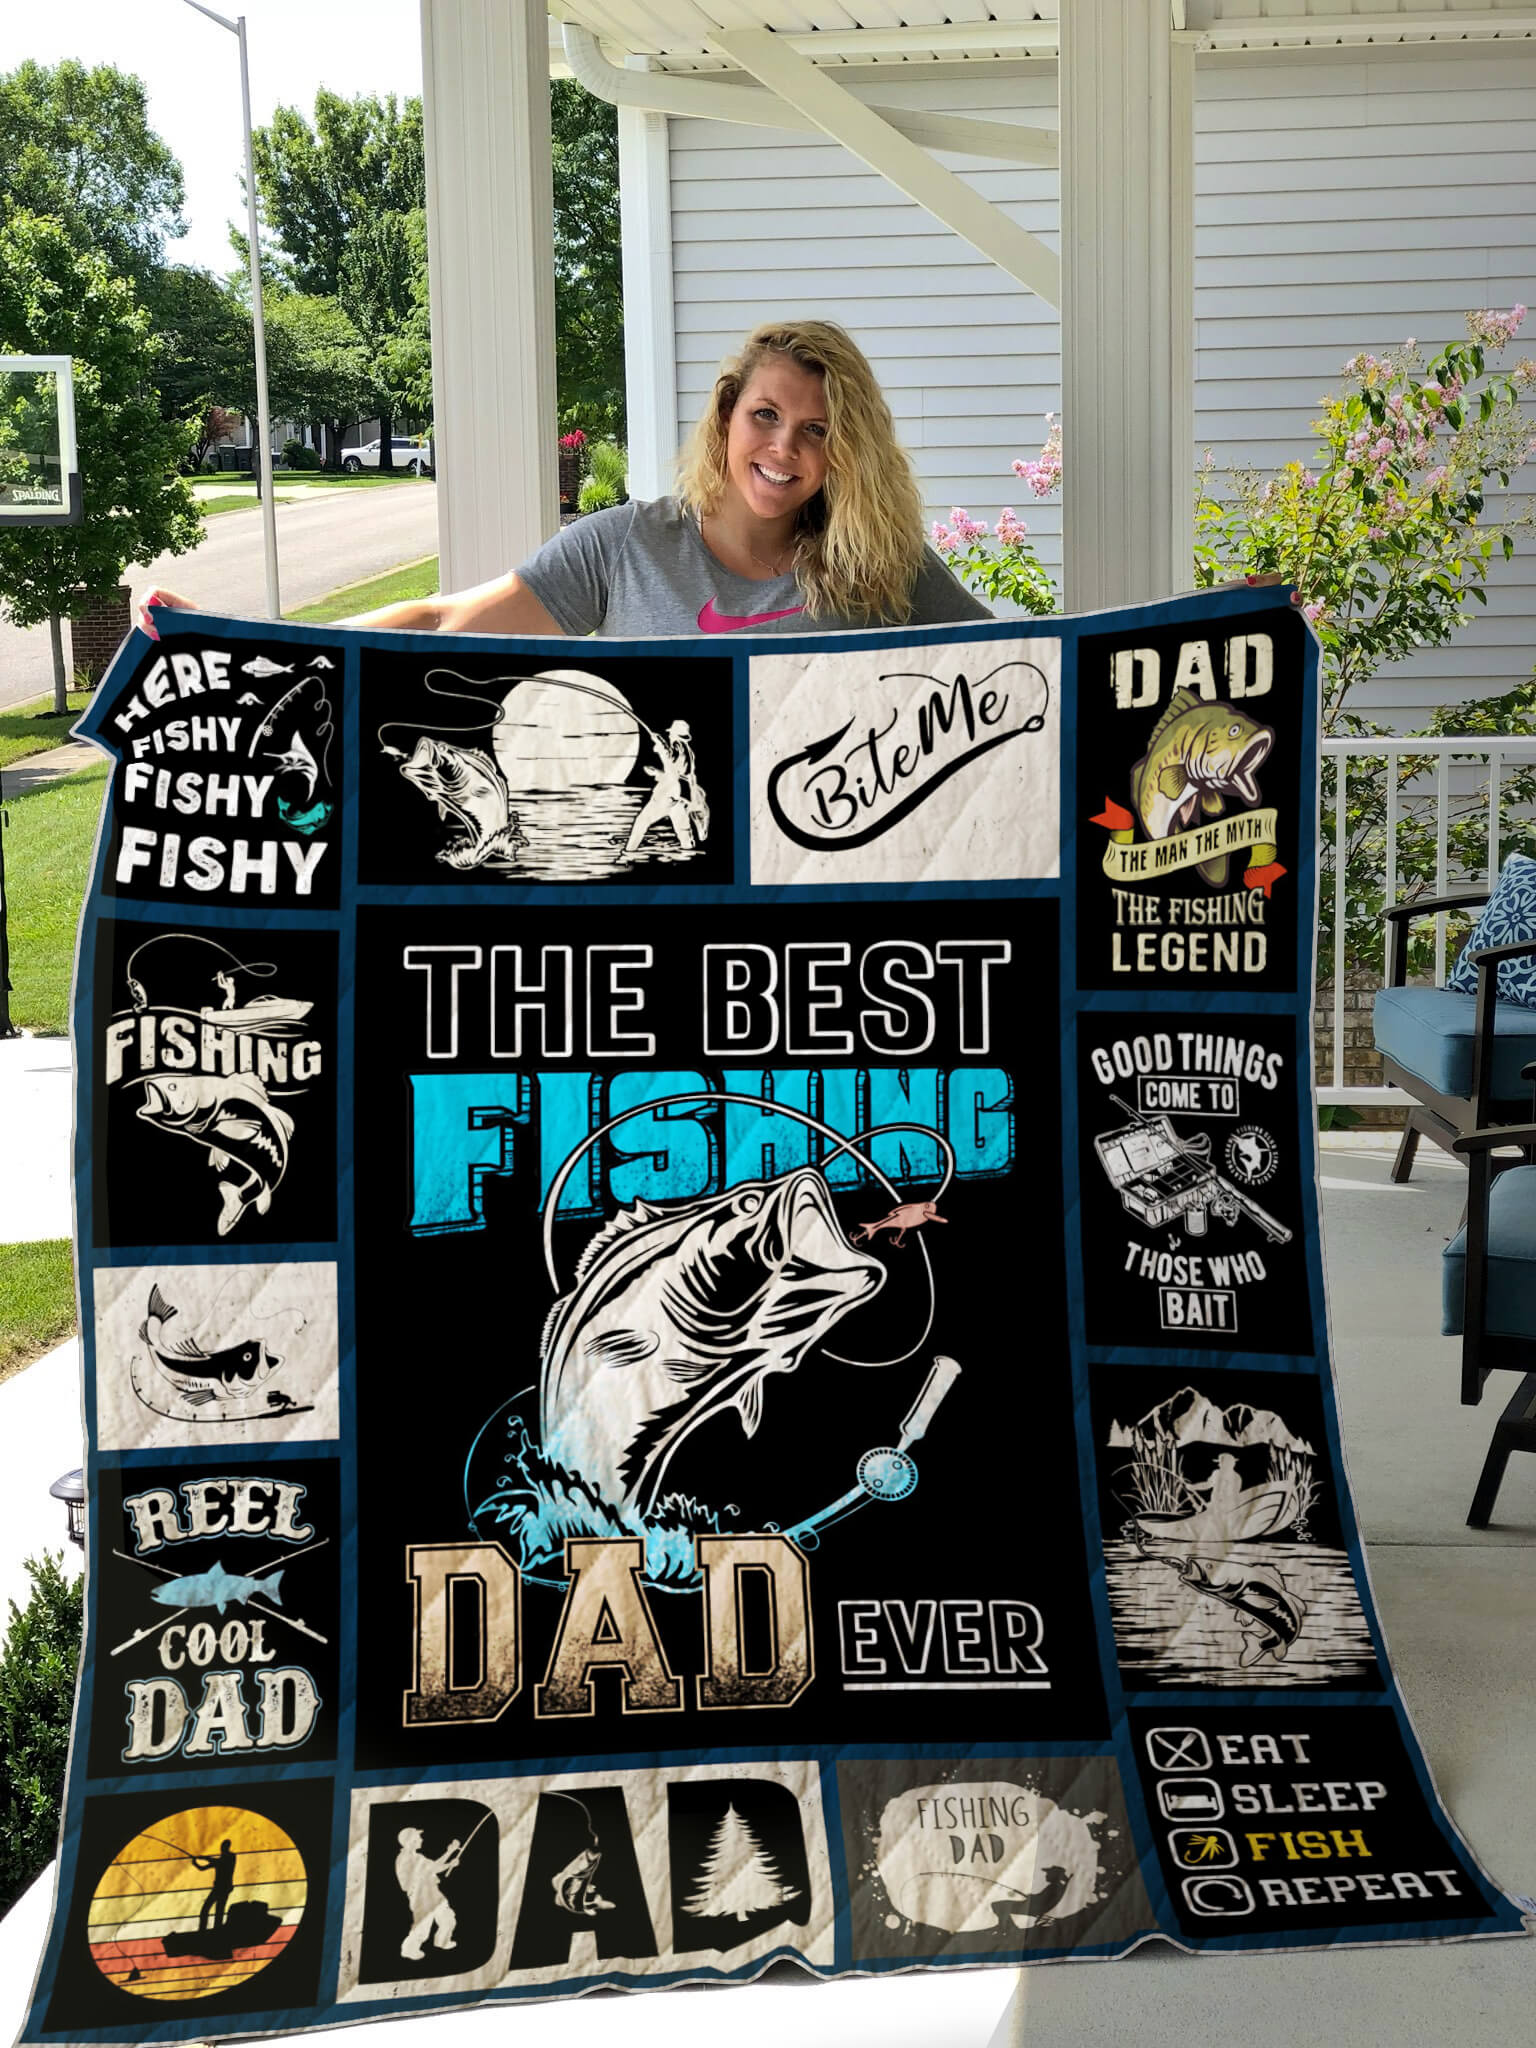 The Best Fishing Dad Ever Reel Cool Dad Quilt Blanket Great